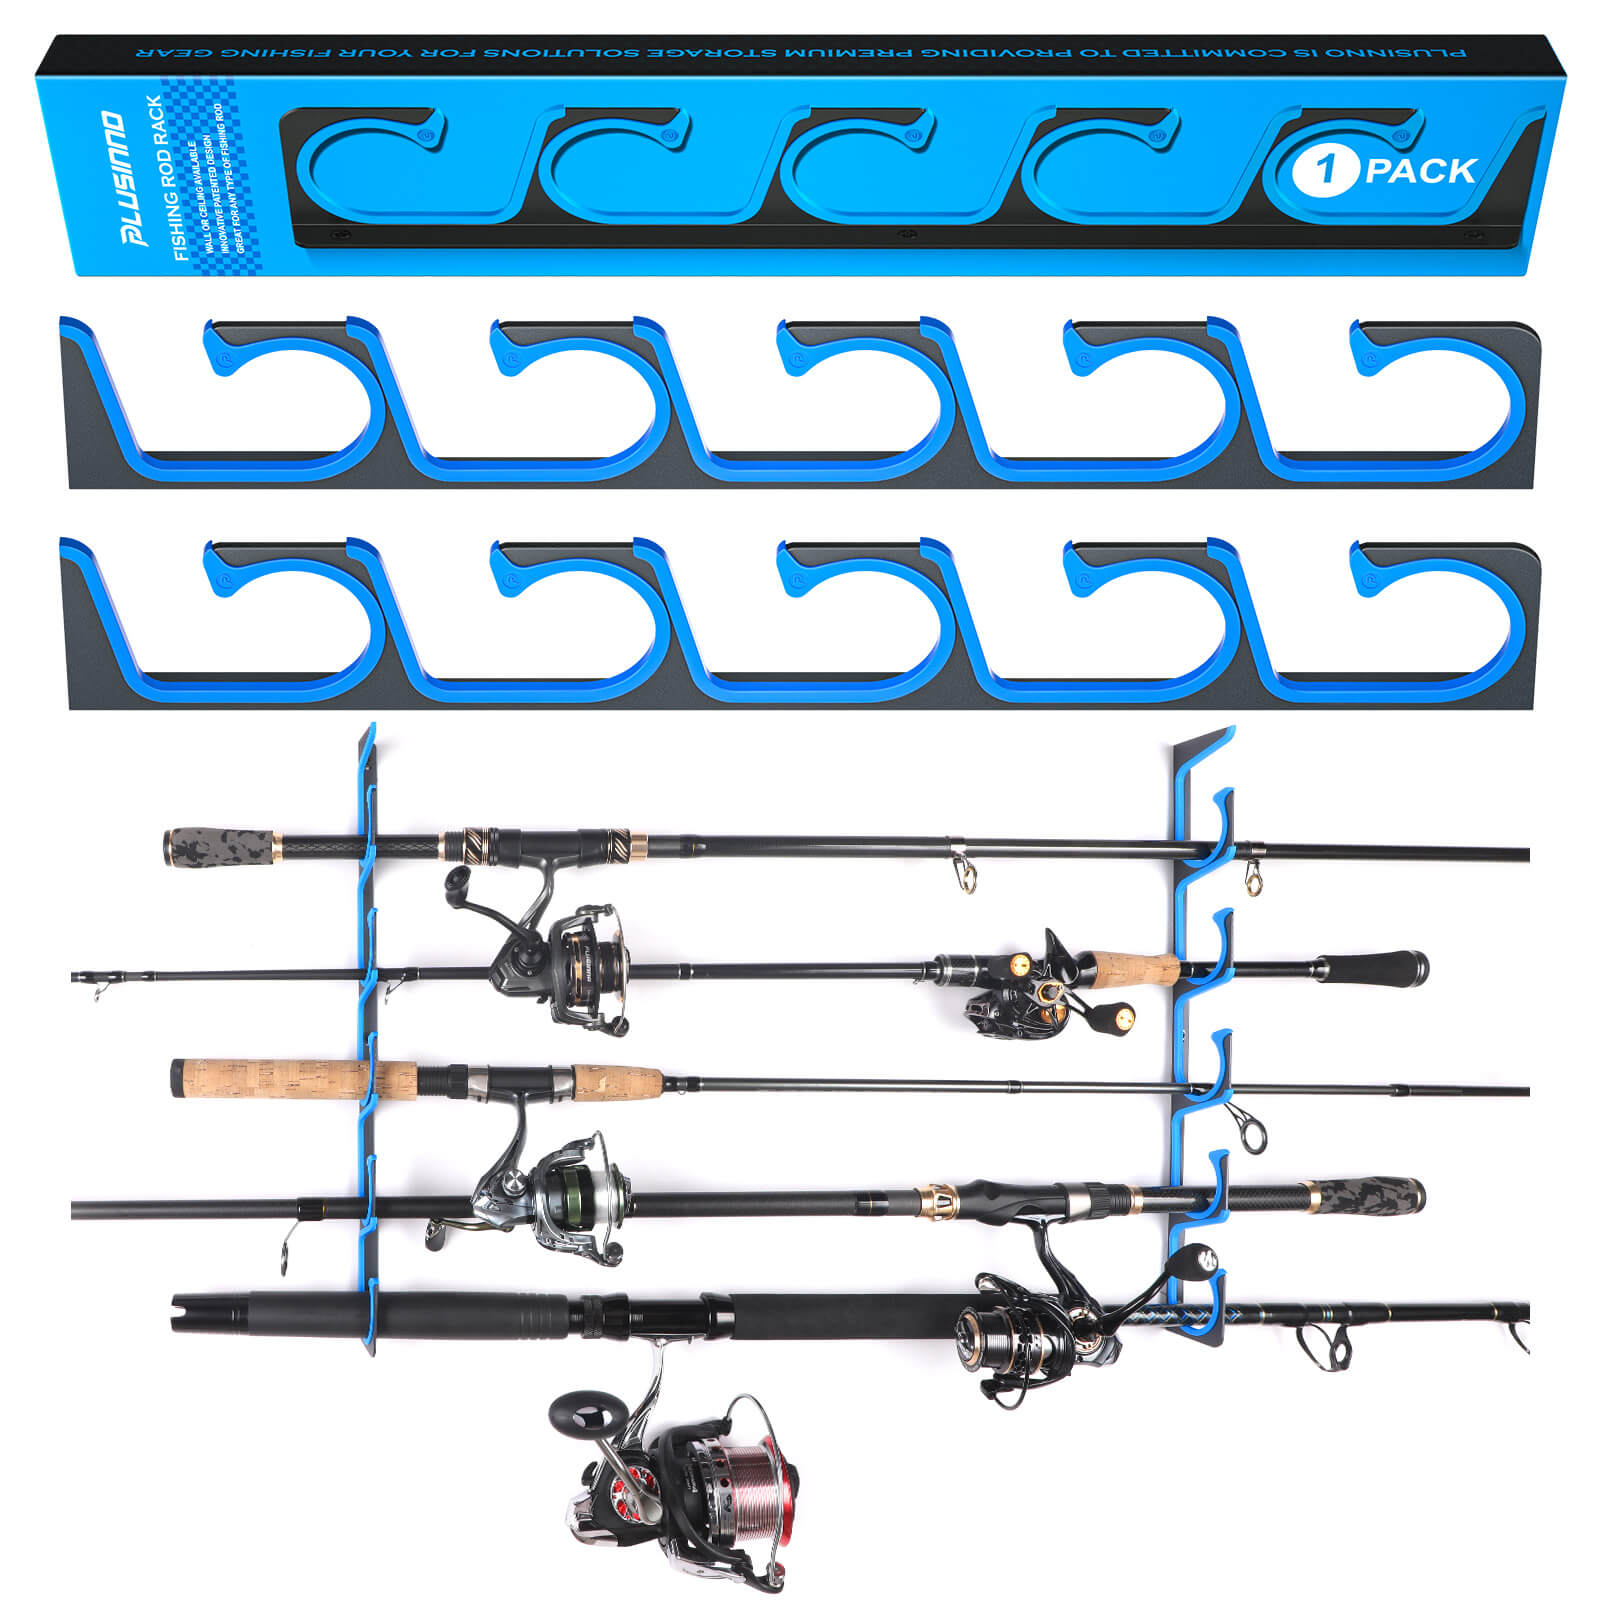 How to Build a Customized Fishing Pole Rack for Your Garage or Boat –  Telegraph